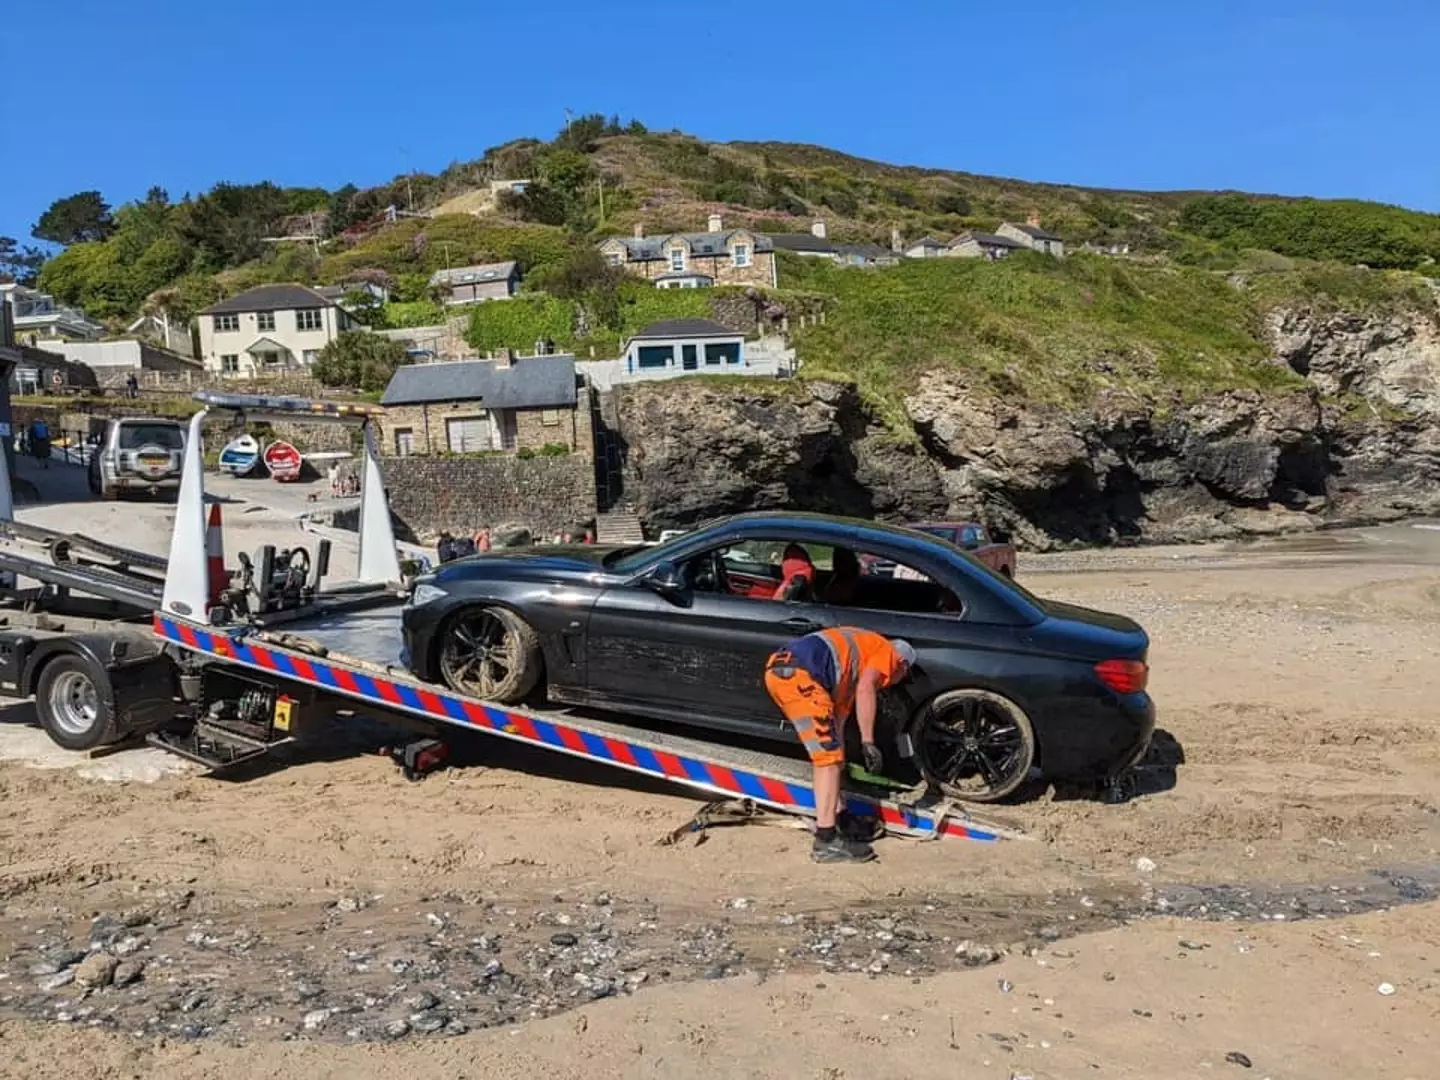 The BMW had to be pulled out of the sea.